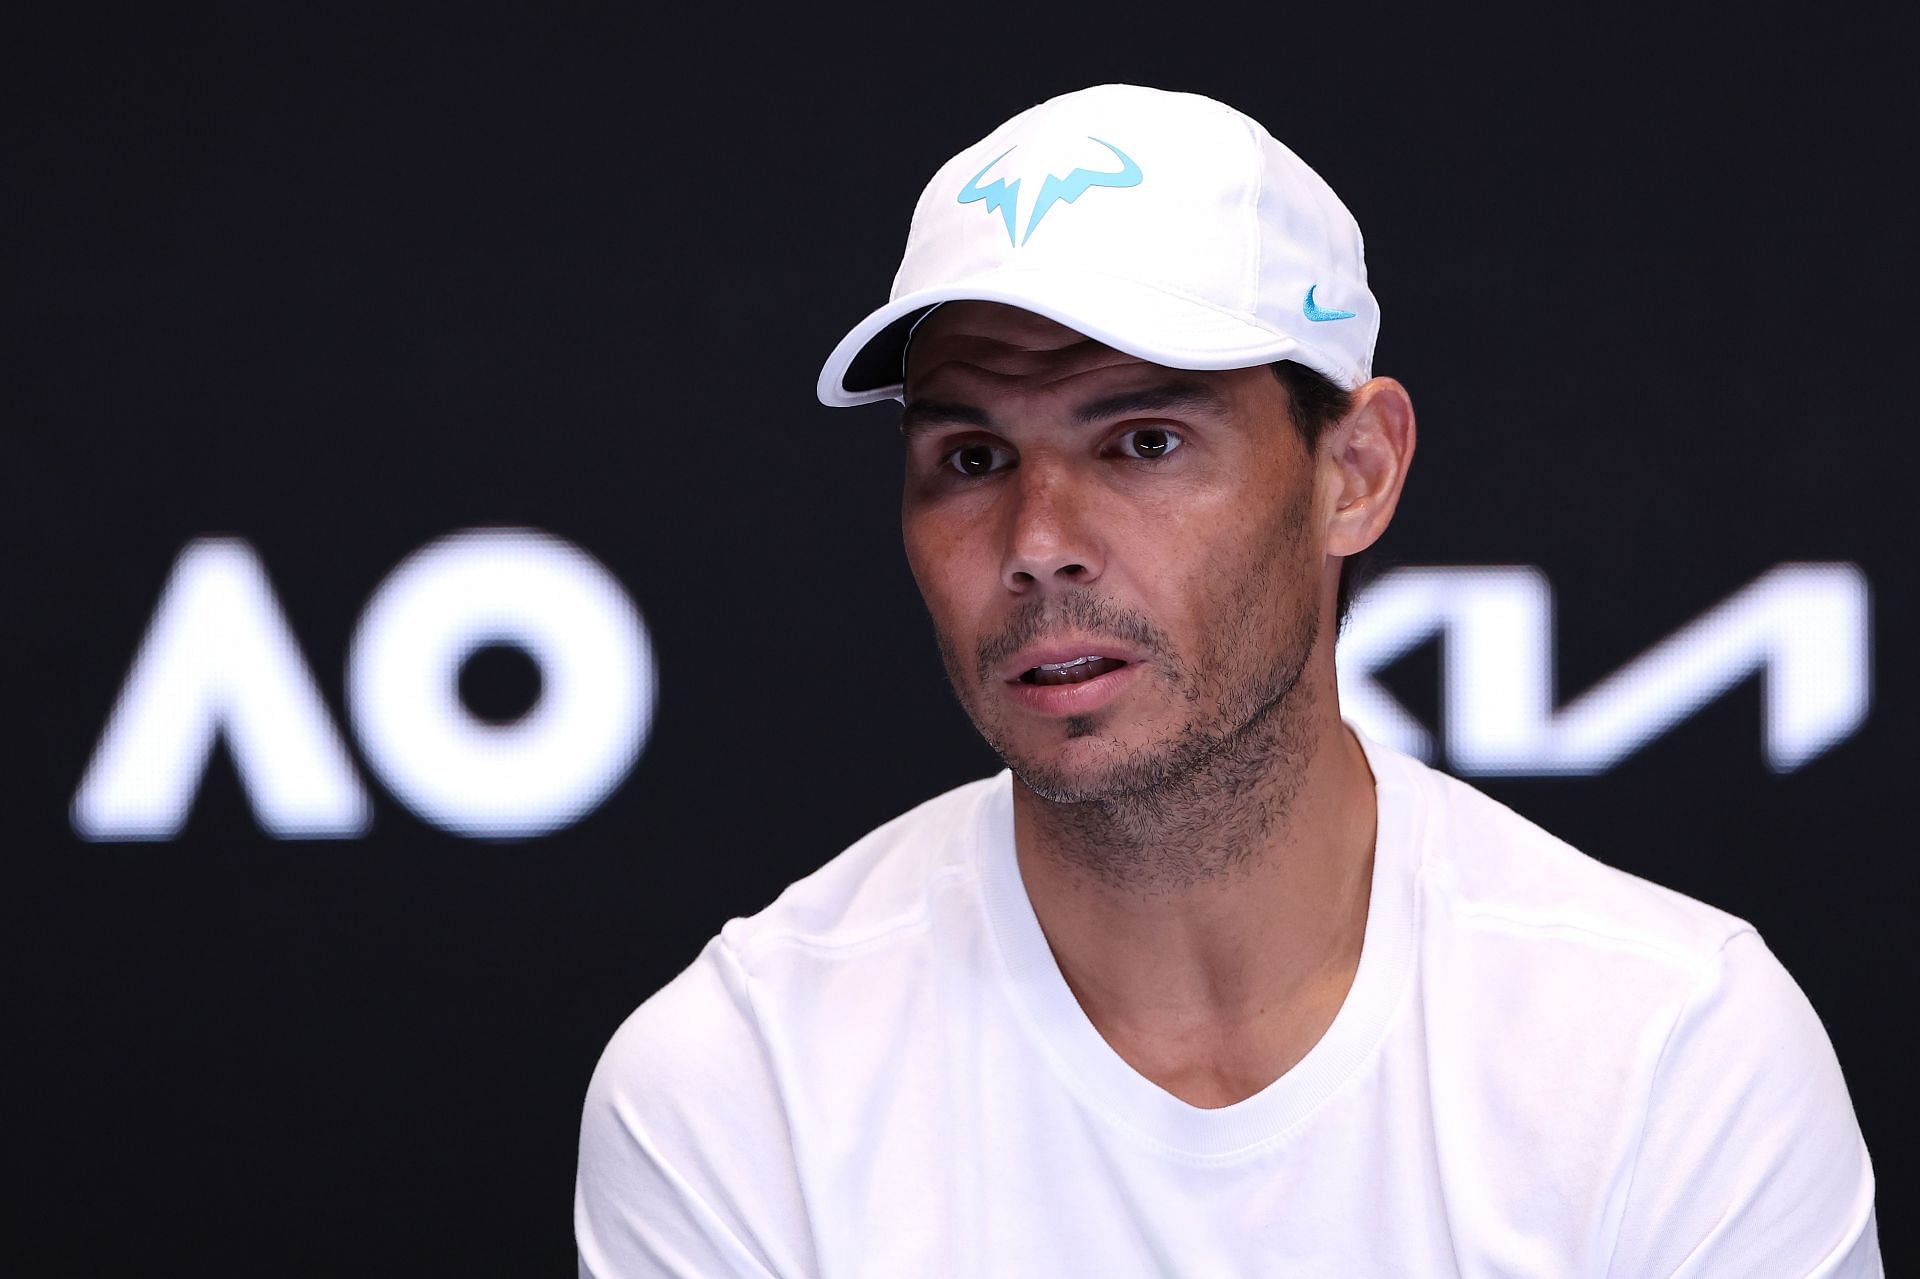 Nadal at the 2023 Australian Open - Day 3